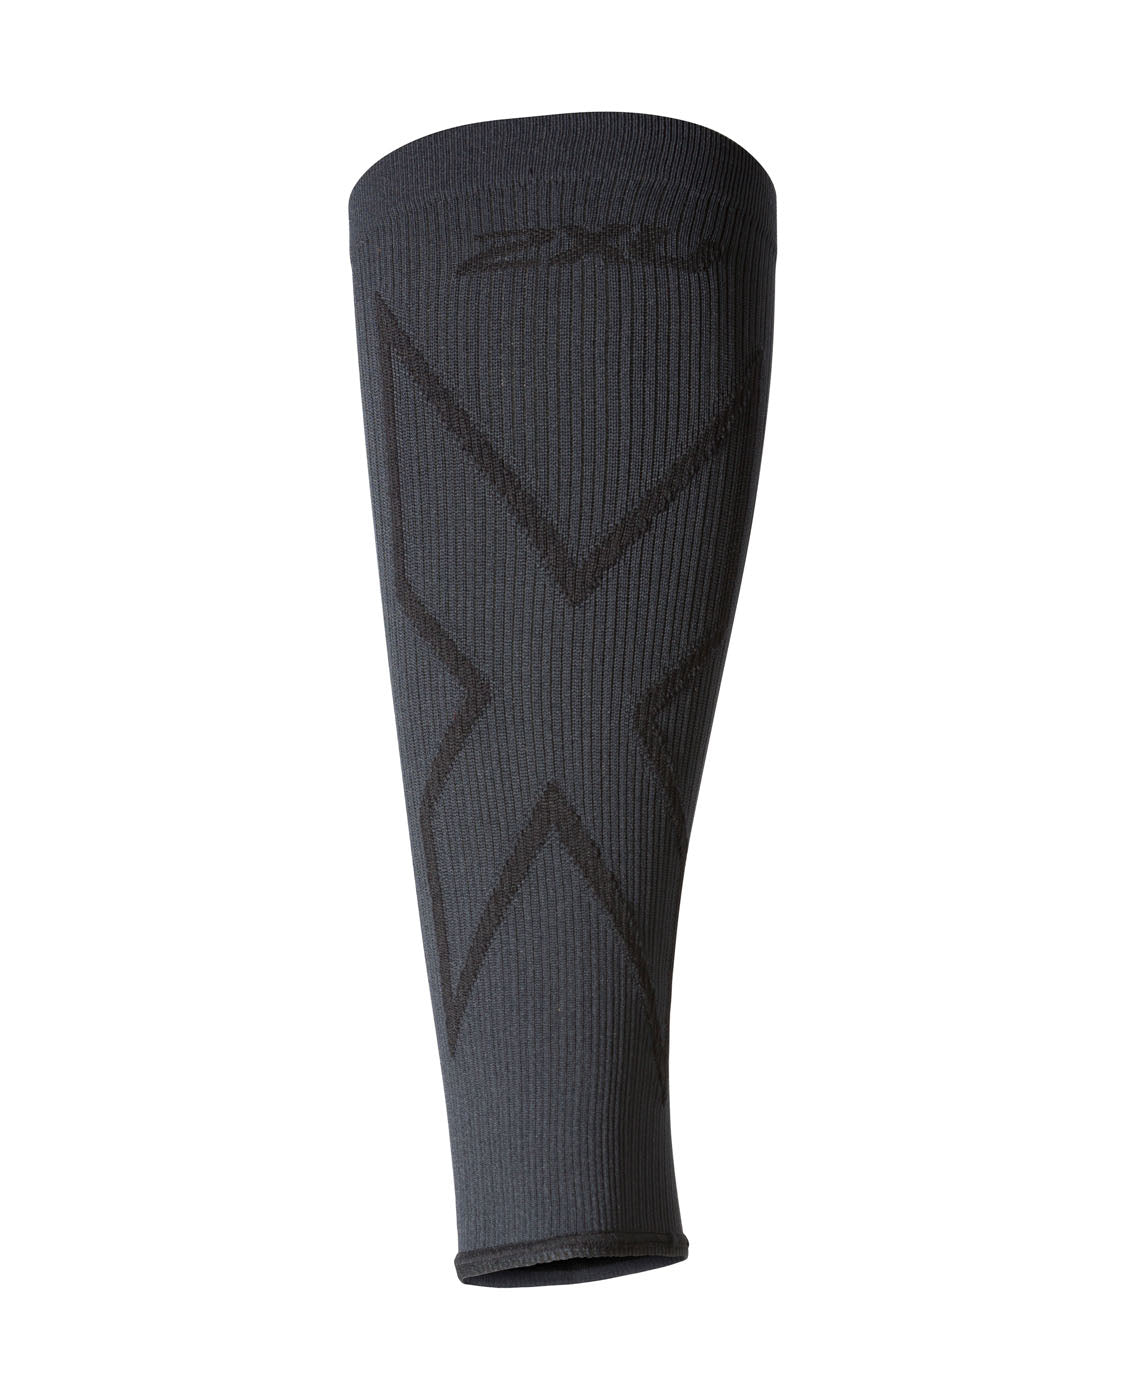 2XU Unisex Leg Sleeves Recovery Flex - Compression Calf Sleeves for  Enhanced Recovery and Performance - Black/Nero